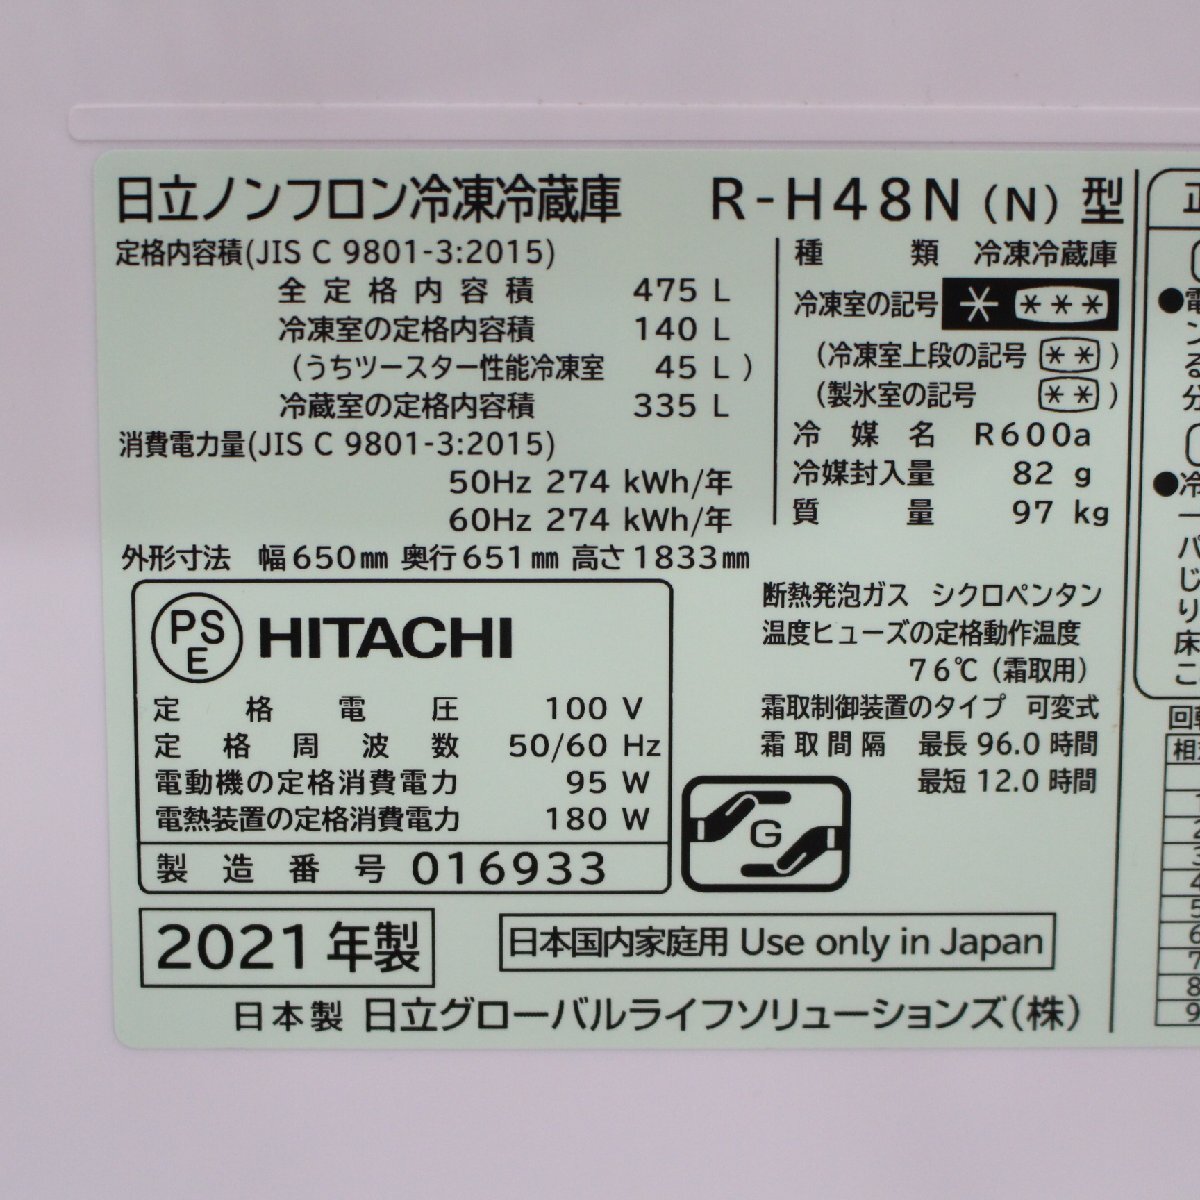 621) Hitachi refrigerator 6 door double doors type 475L H type R-H48N-N 2021 year made champagne simple design wholly tilt HITACHI